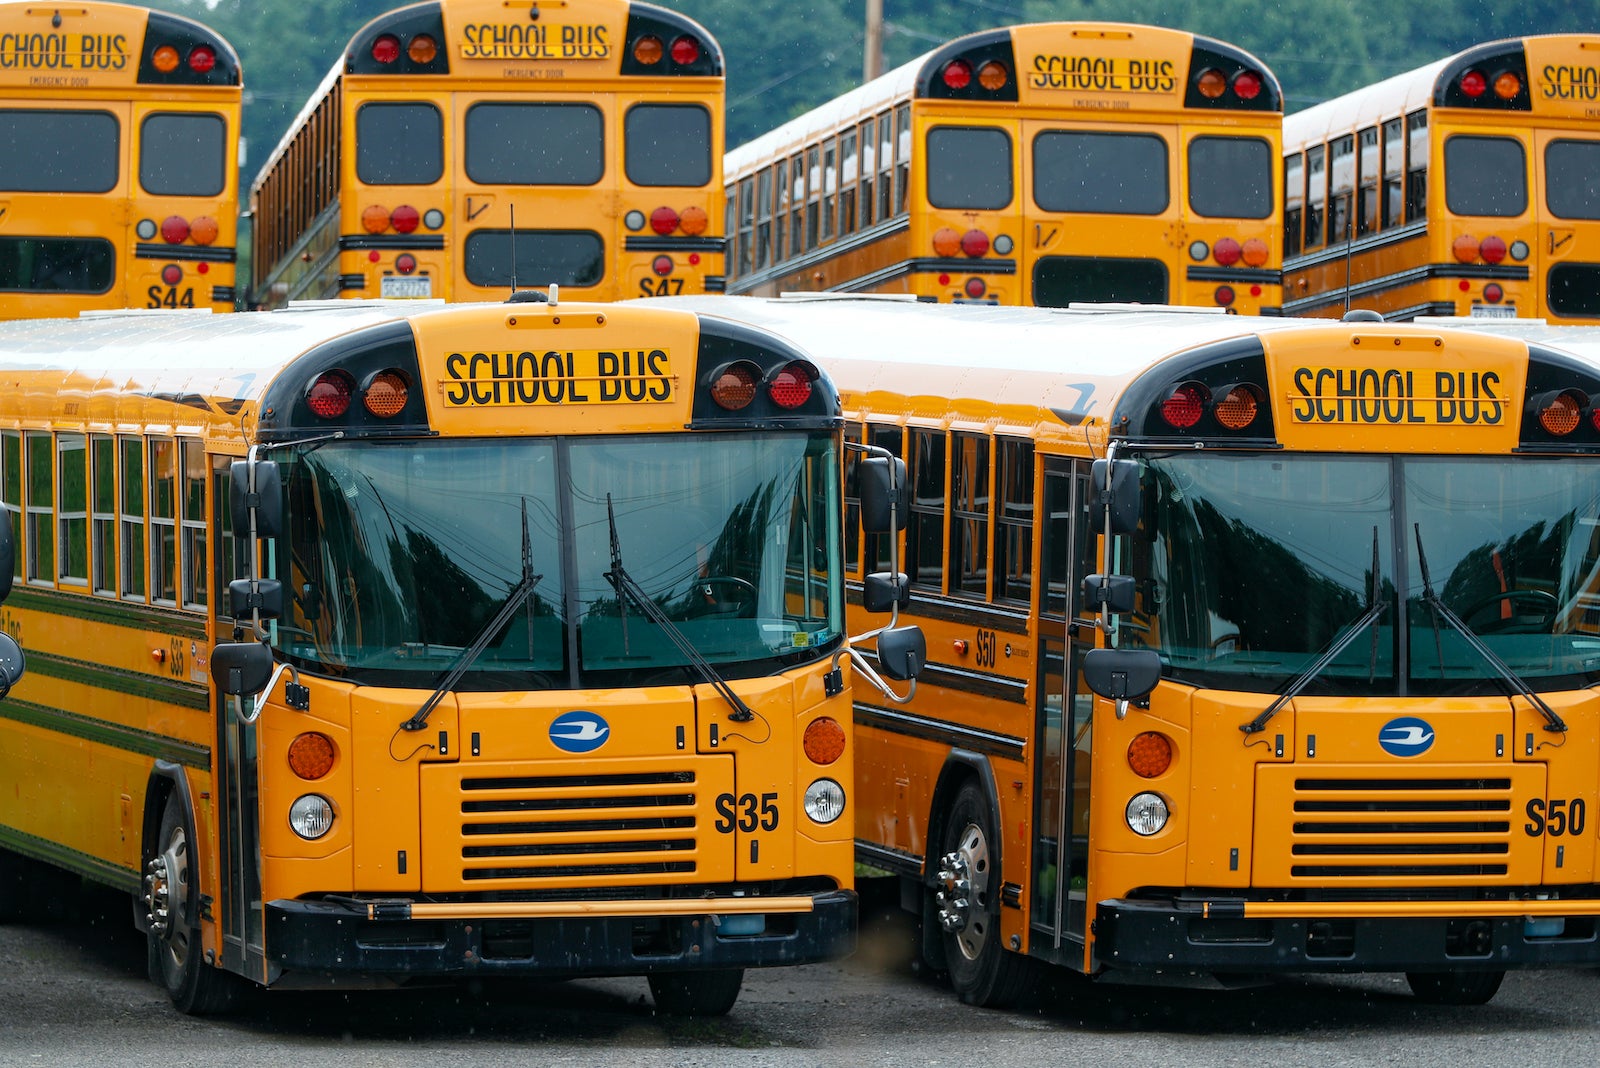 U.S. CDC issues guidelines on how to reopen schools, transit and workplaces